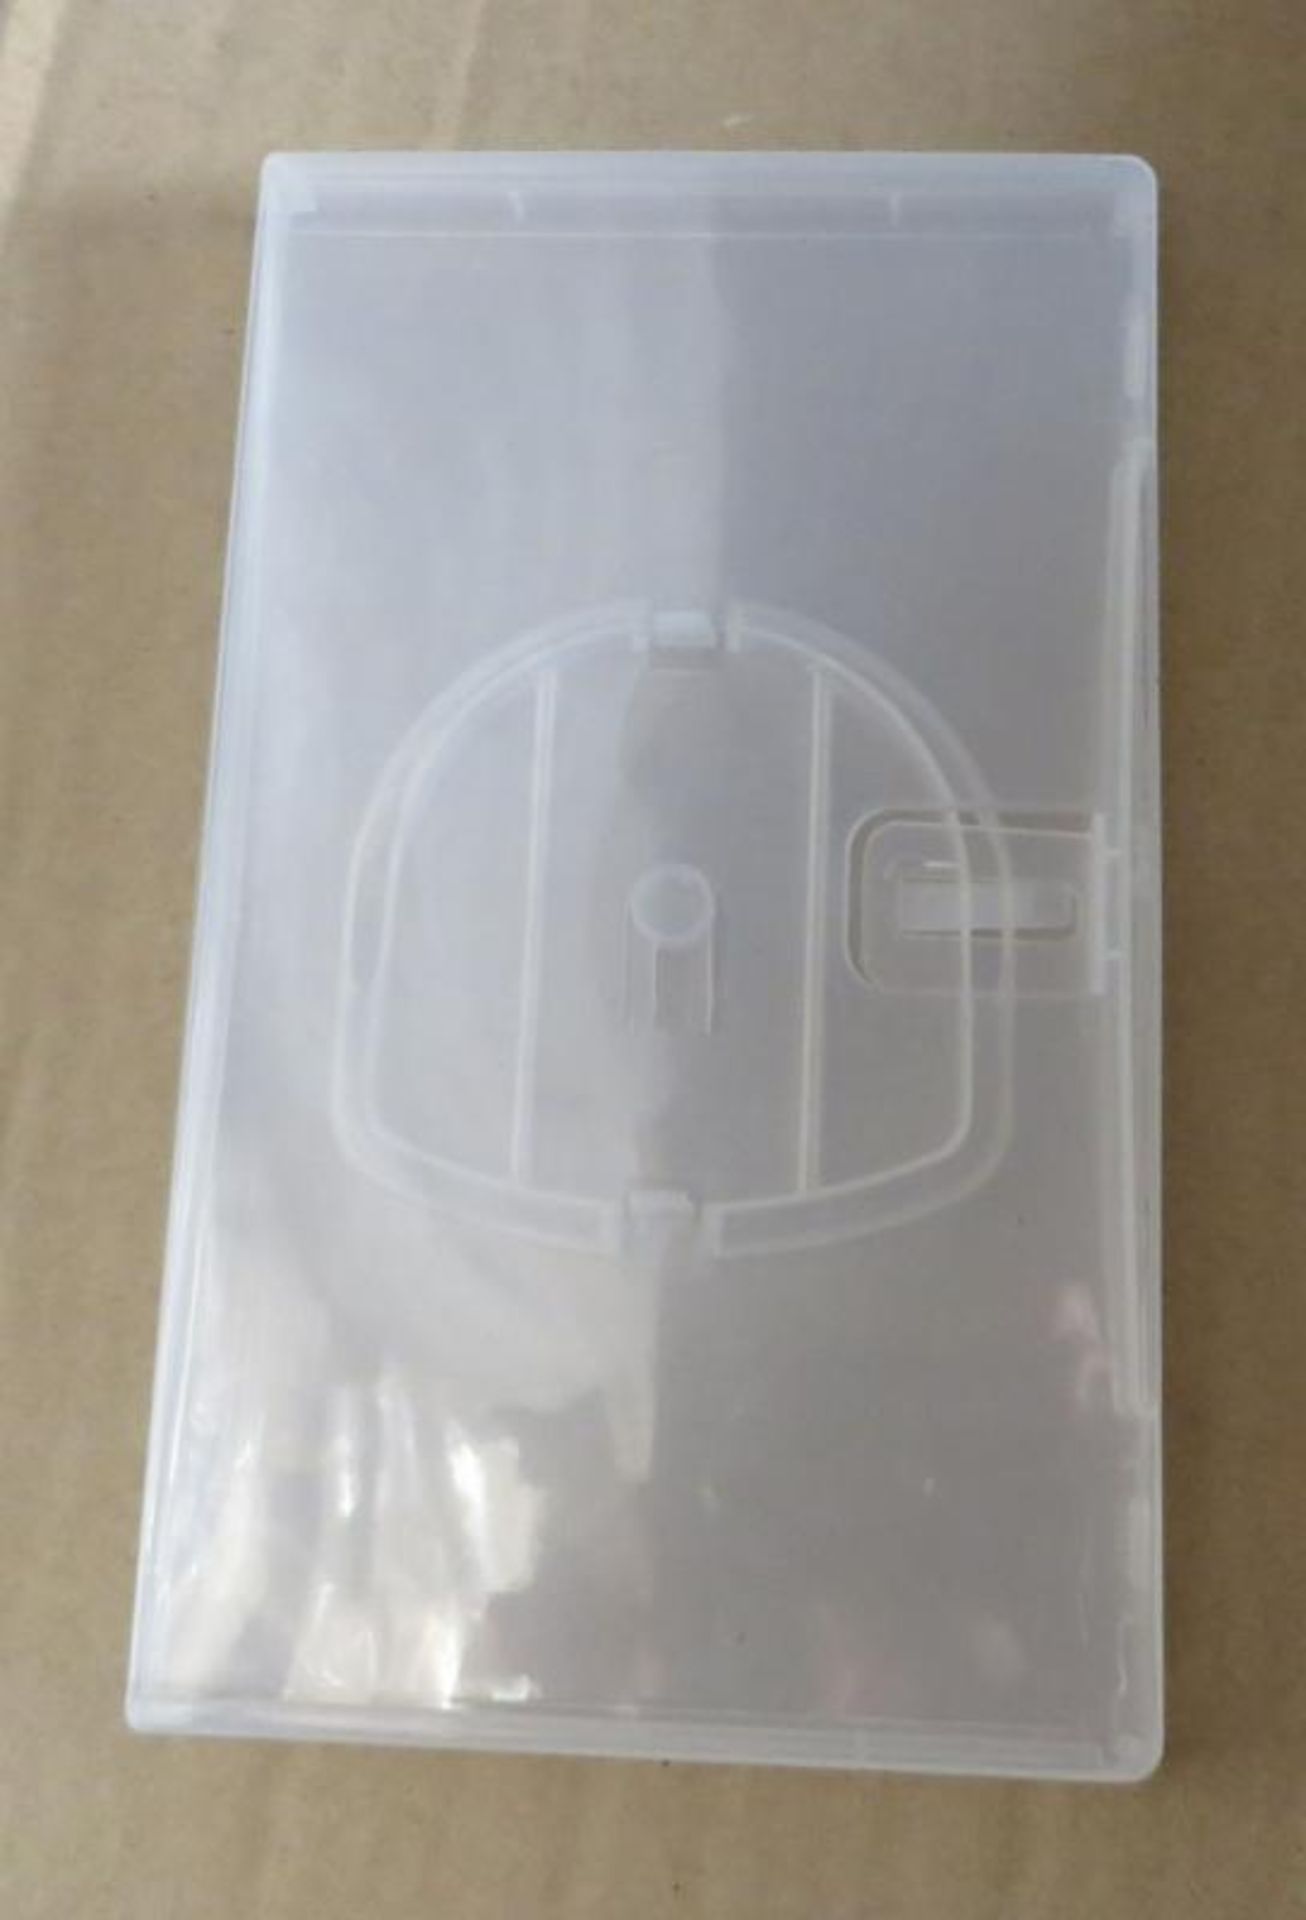 100 x UMD PSP Clear Cases - Ref: DRT0230 - CL185 - Location: Stoke-on-Trent ST3 - Image 3 of 8